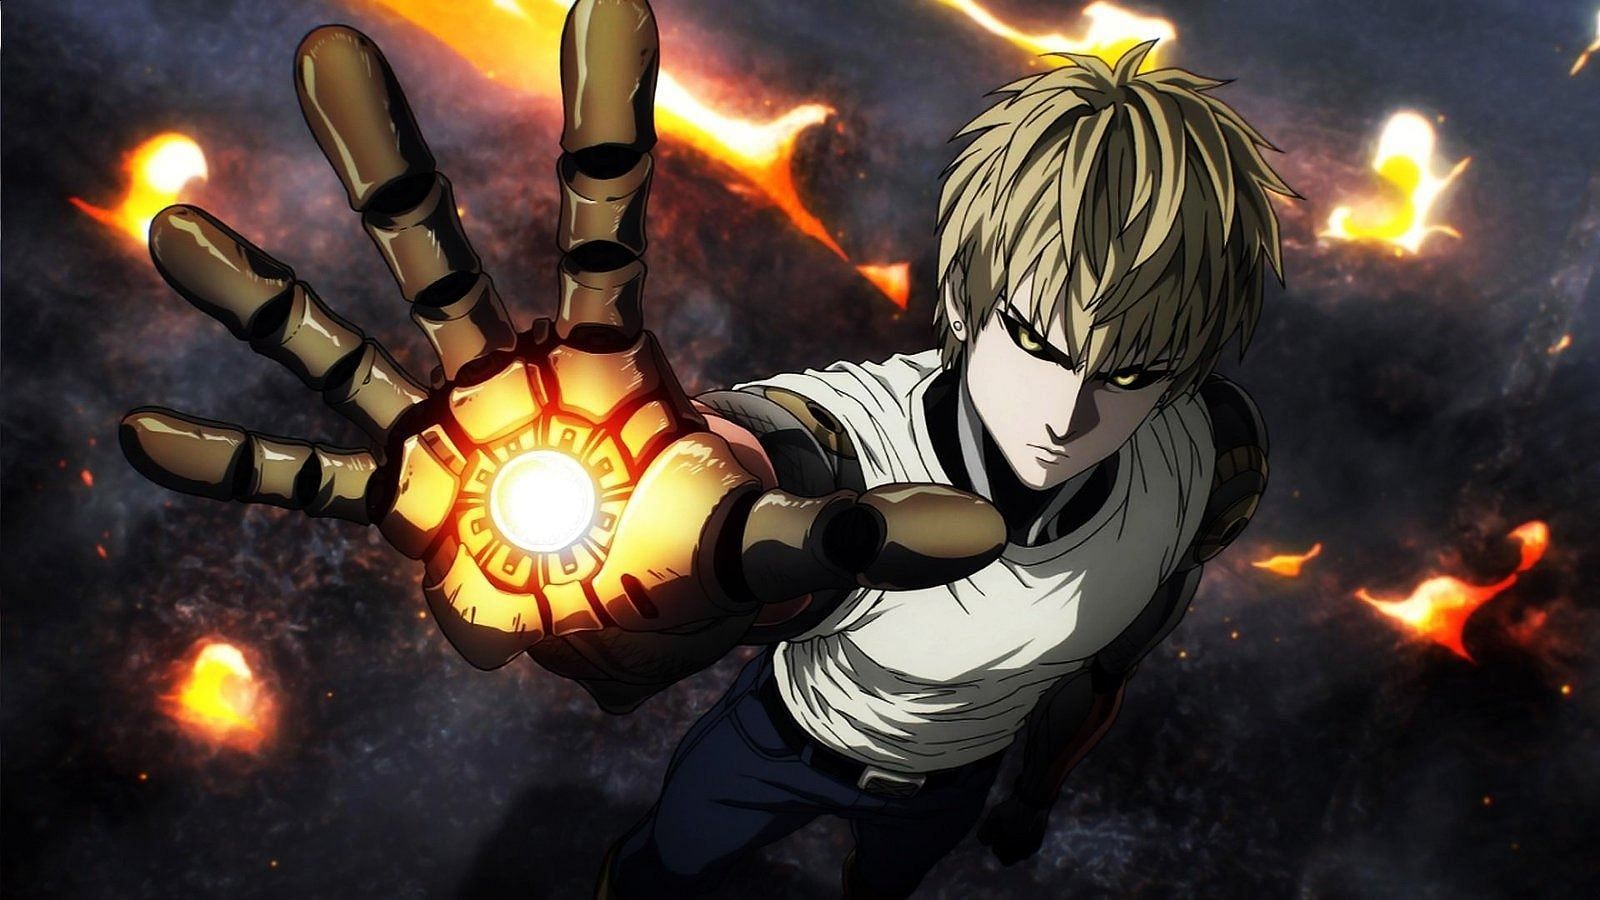 Why One Punch Man Season 3 wasn't announced in Mappa Stage - Spiel Anime